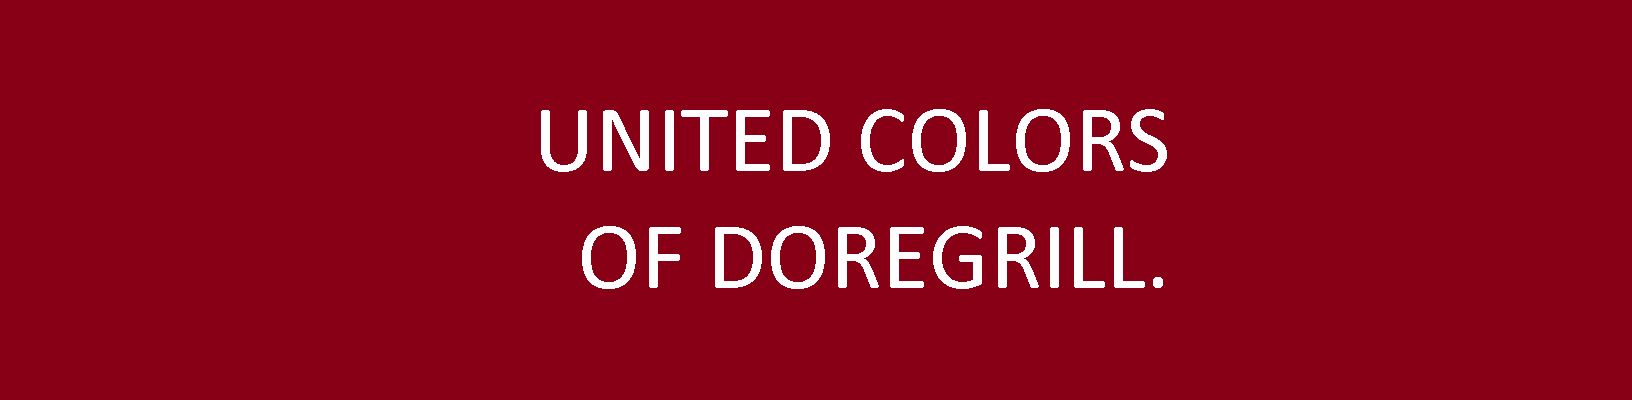 UNITED COLORS OF DOREGRILL